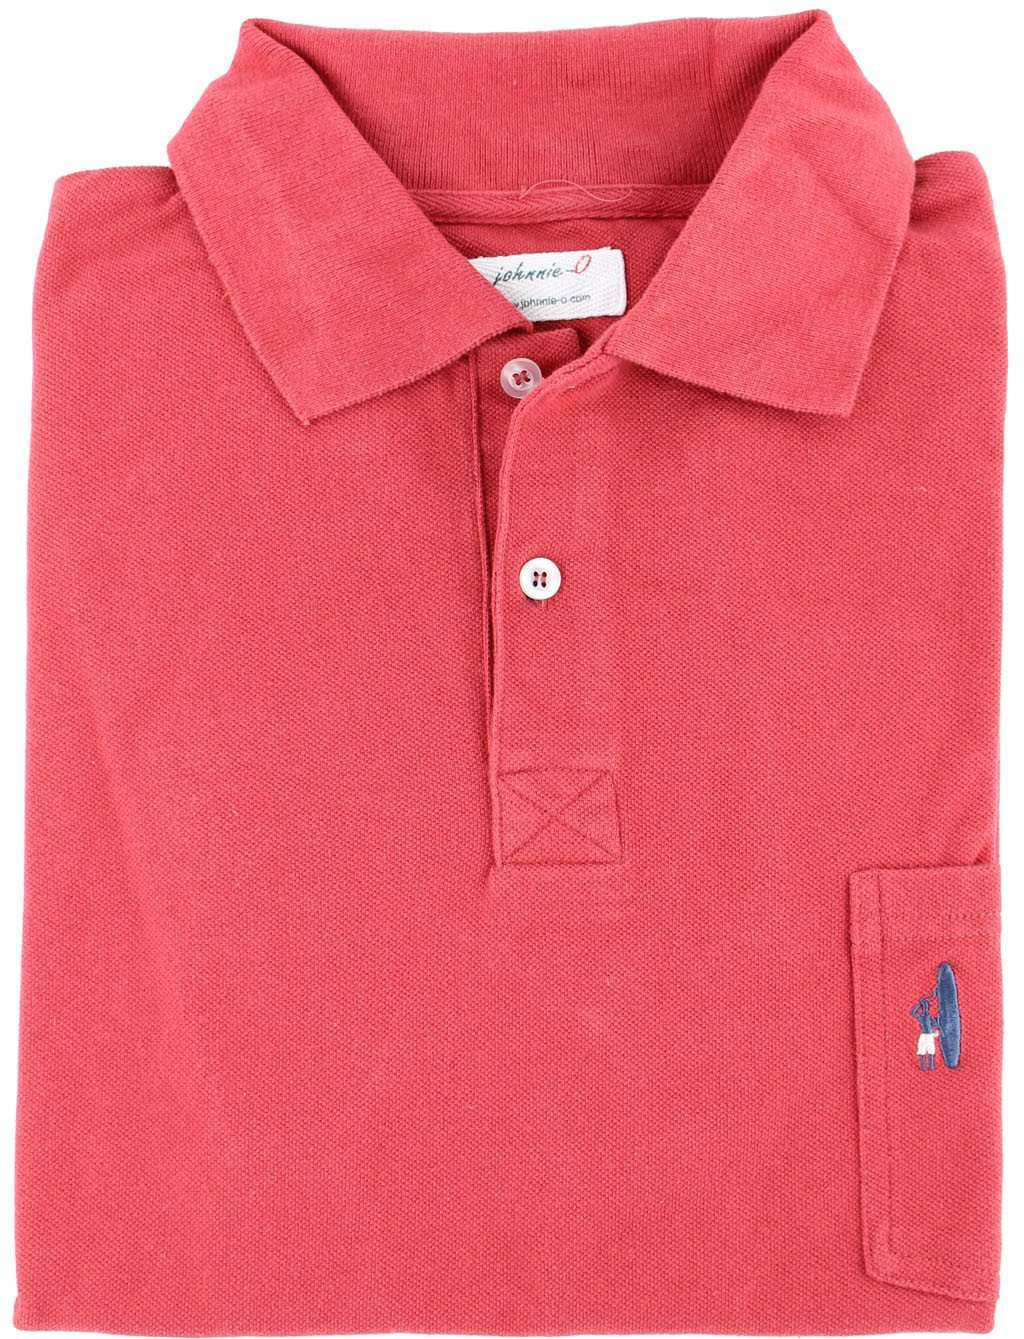 The Long Sleeve Pique Polo in Cranberry Red by Johnnie-O - Country Club Prep